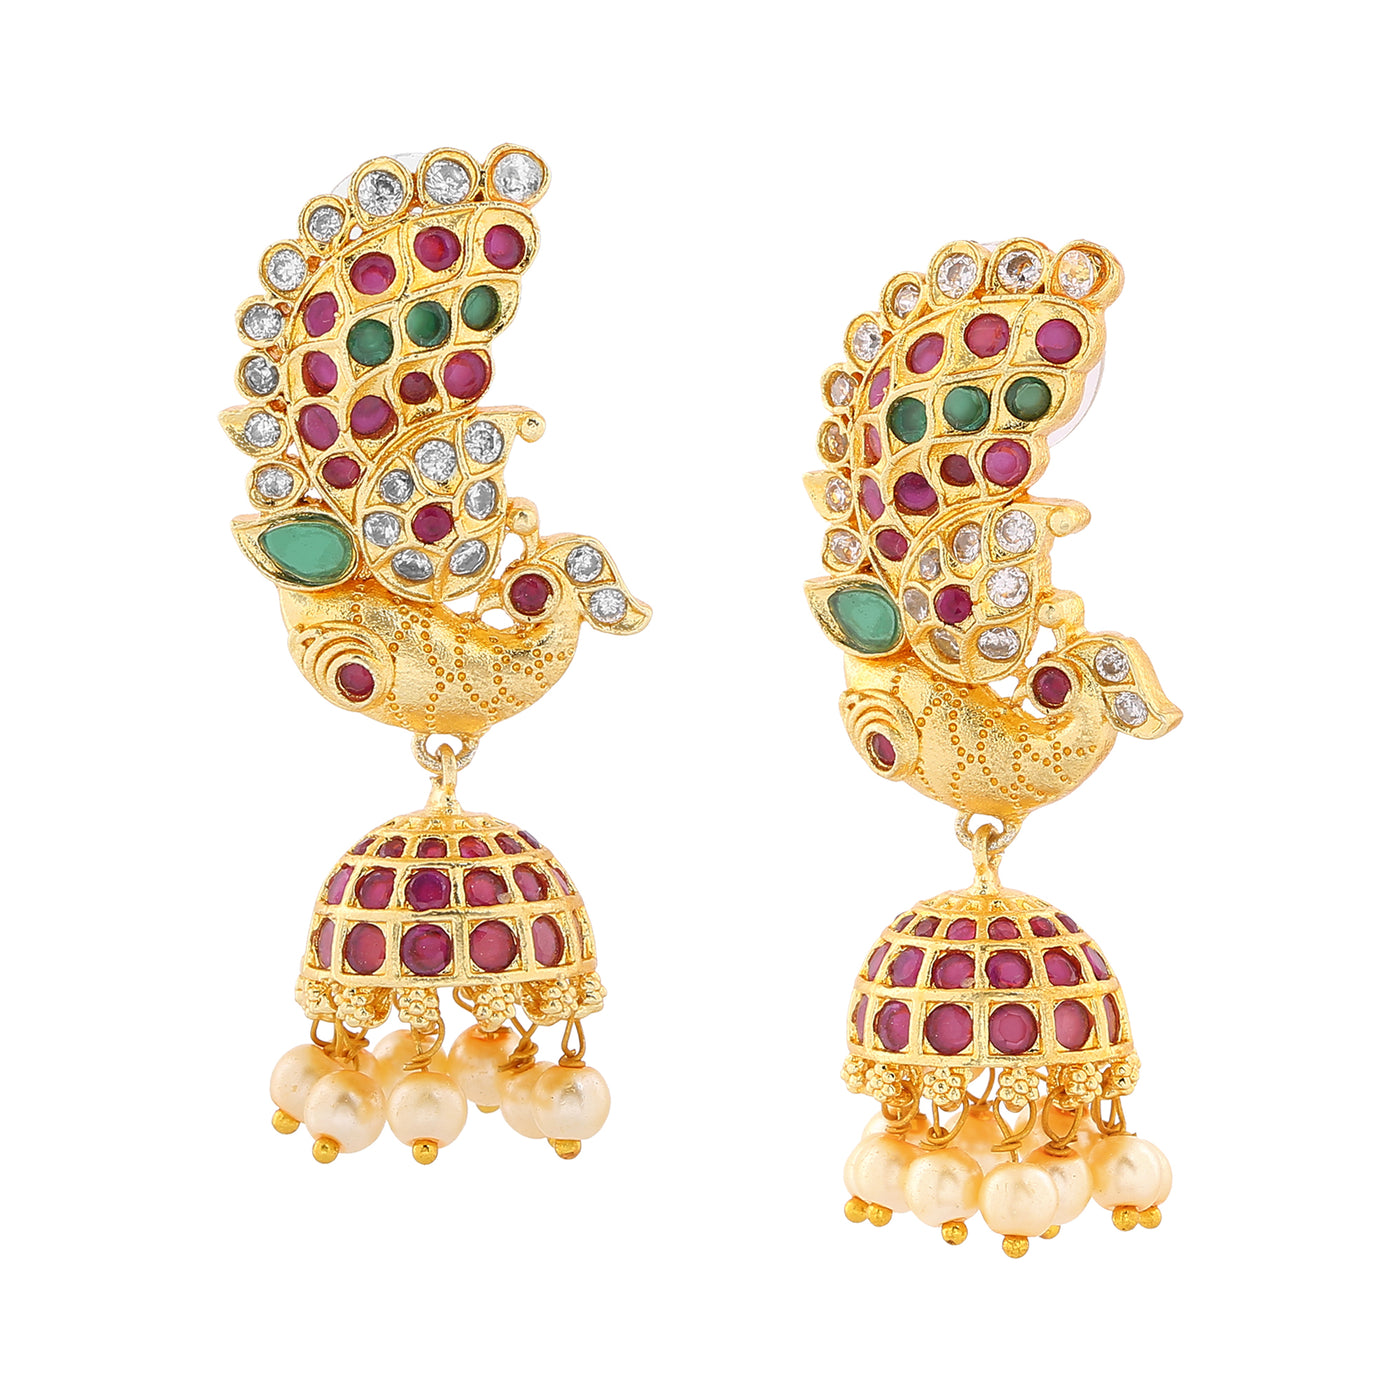 Estele Gold Plated CZ Peacock Designer Jhumki Earrings with Pearls & Colored Stones for Women